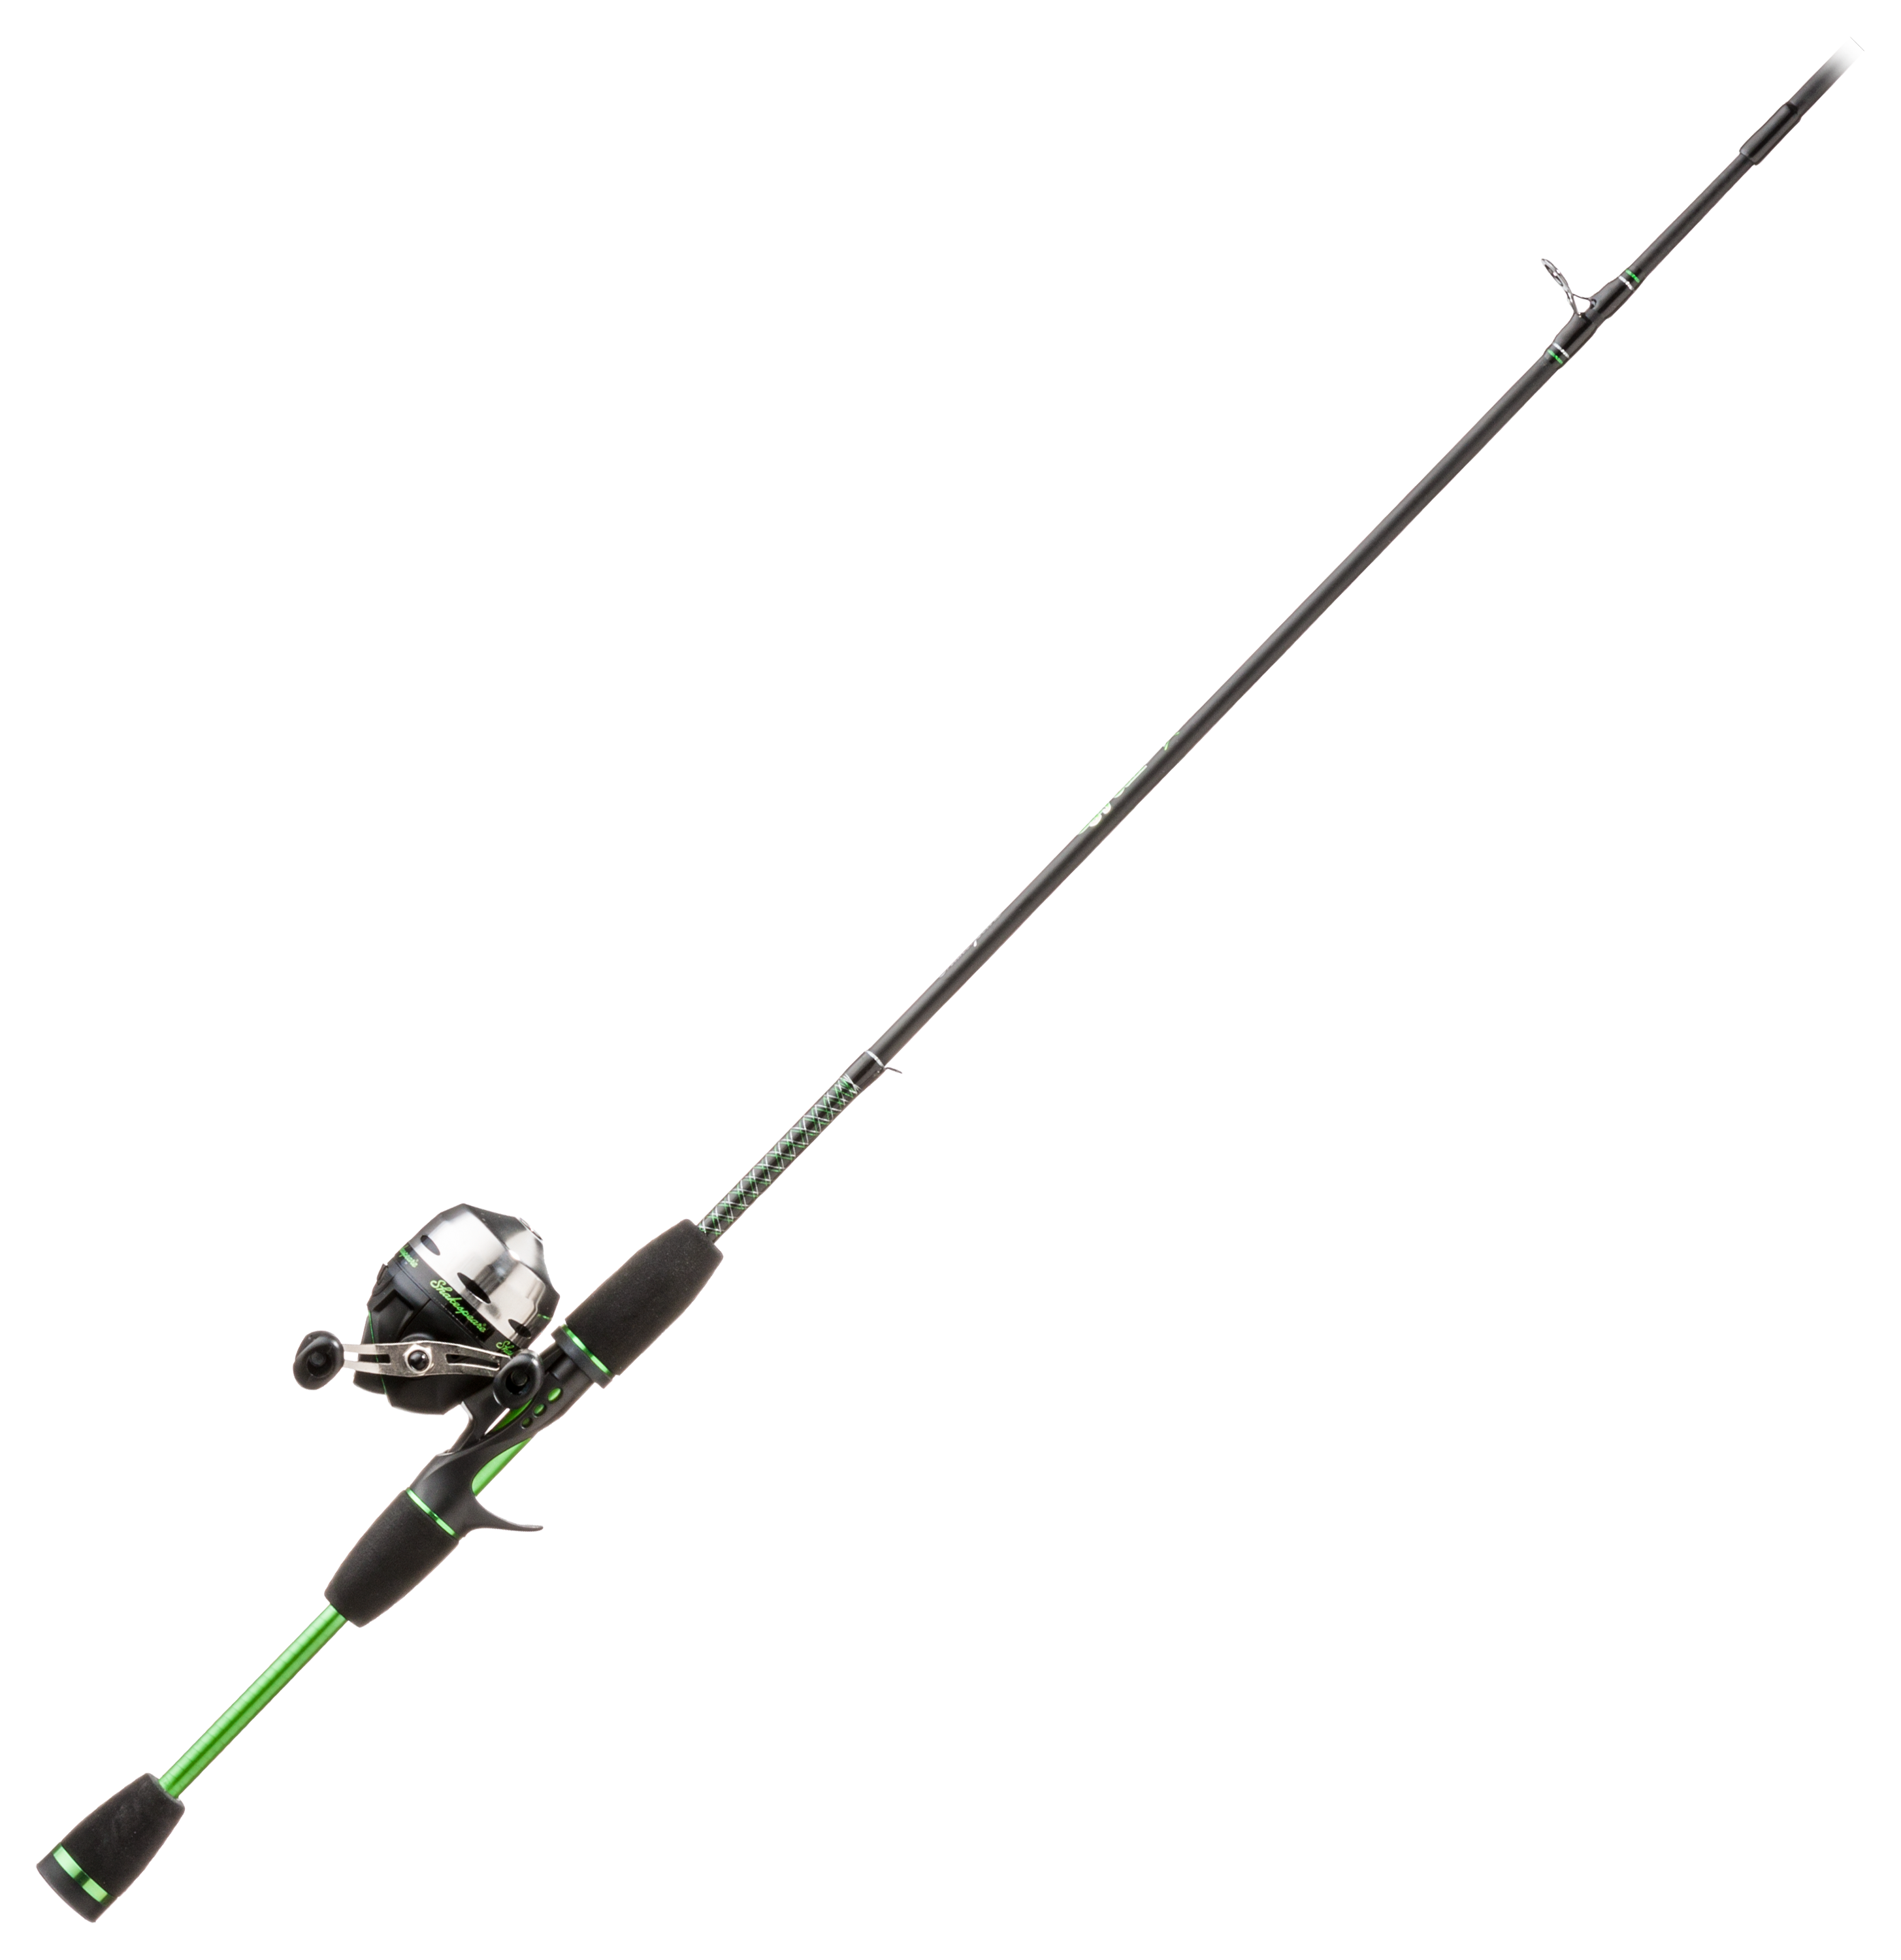 Outdoor Fishing Rods Ugly Stik 7' GX2 Spinning Rod, Two Piece Spinning Rod